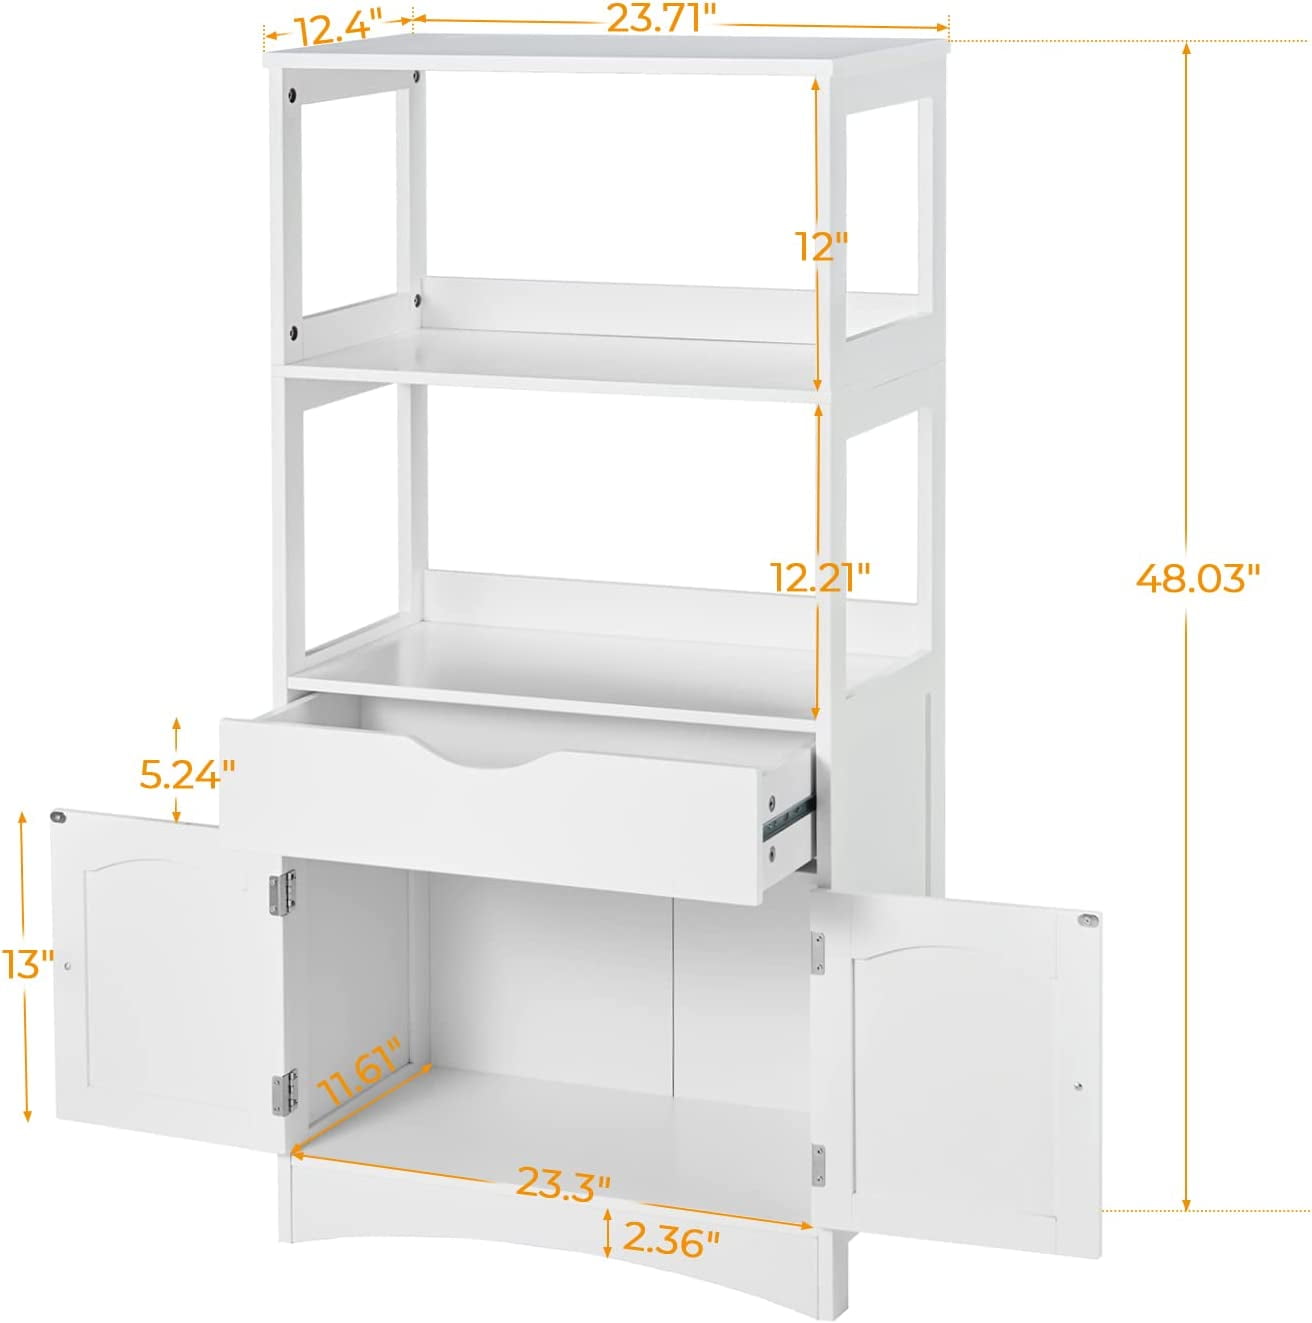 Two Sided Shelves Under Counter Storage Cabinets x2 Home Office Business  Shop in Indiana, Pennsylvania, United States (IronPlanet Item #5947631)